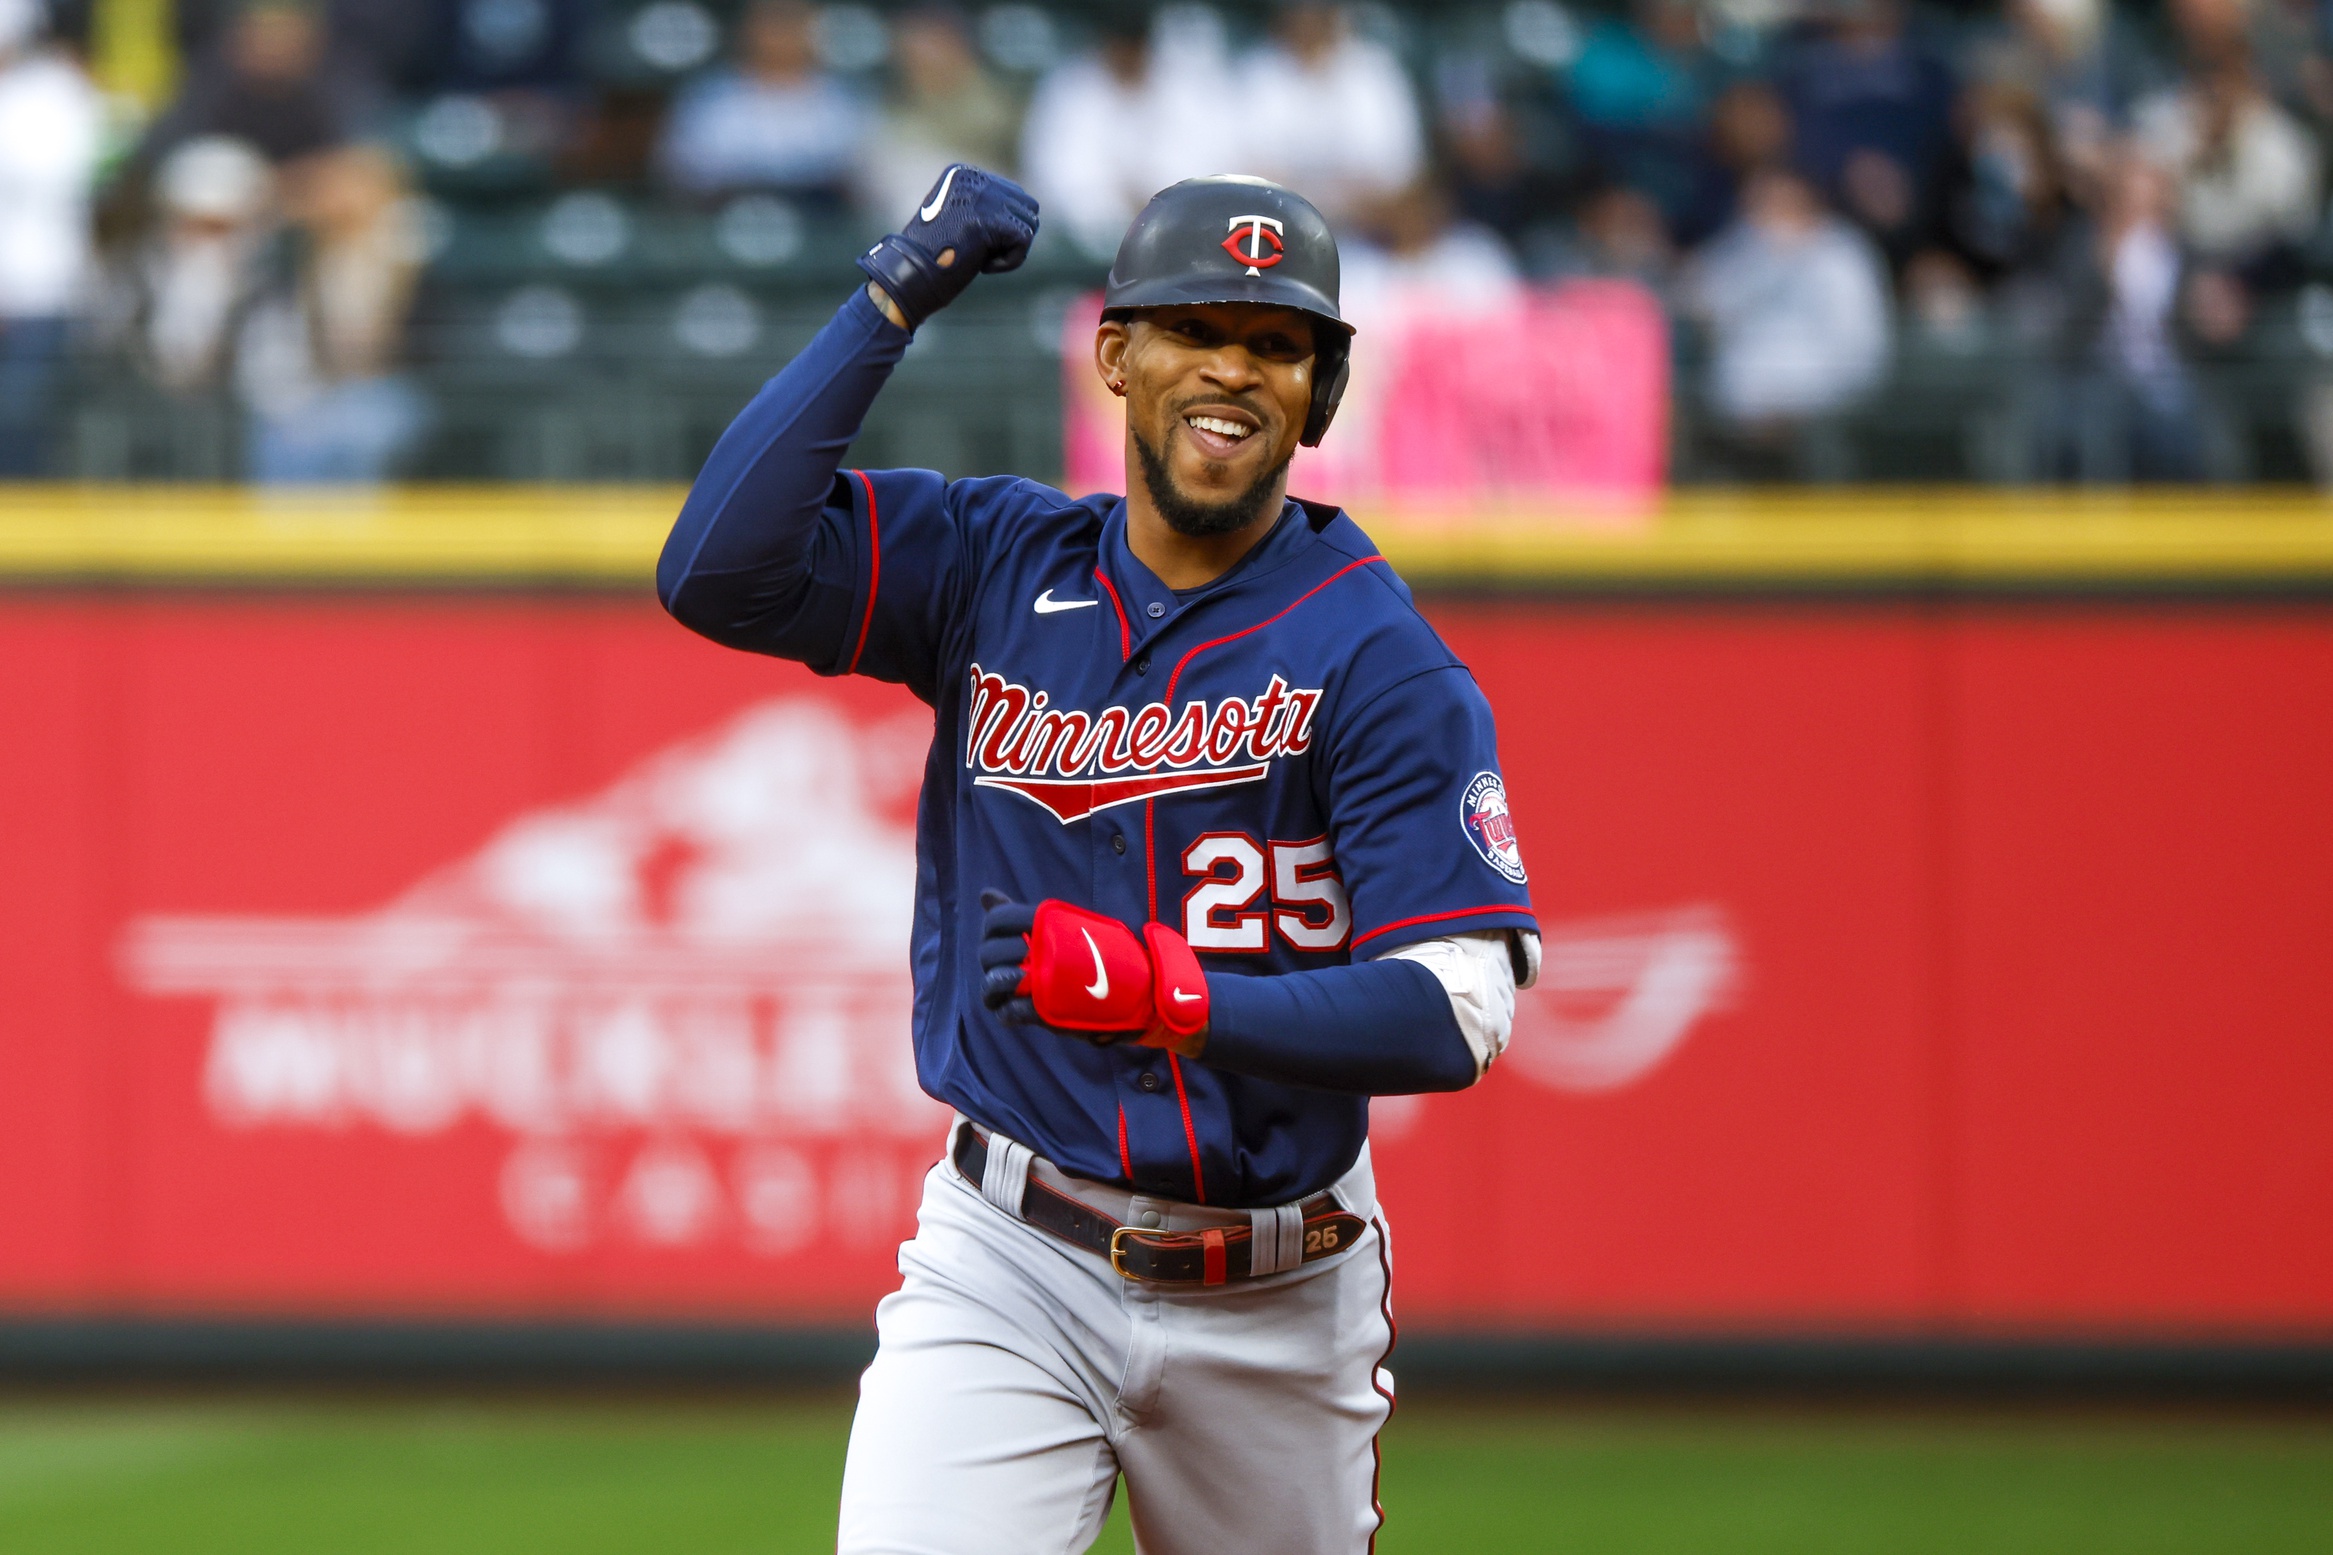 Byron Buxton promoted to starting center fielder in All-Star Game